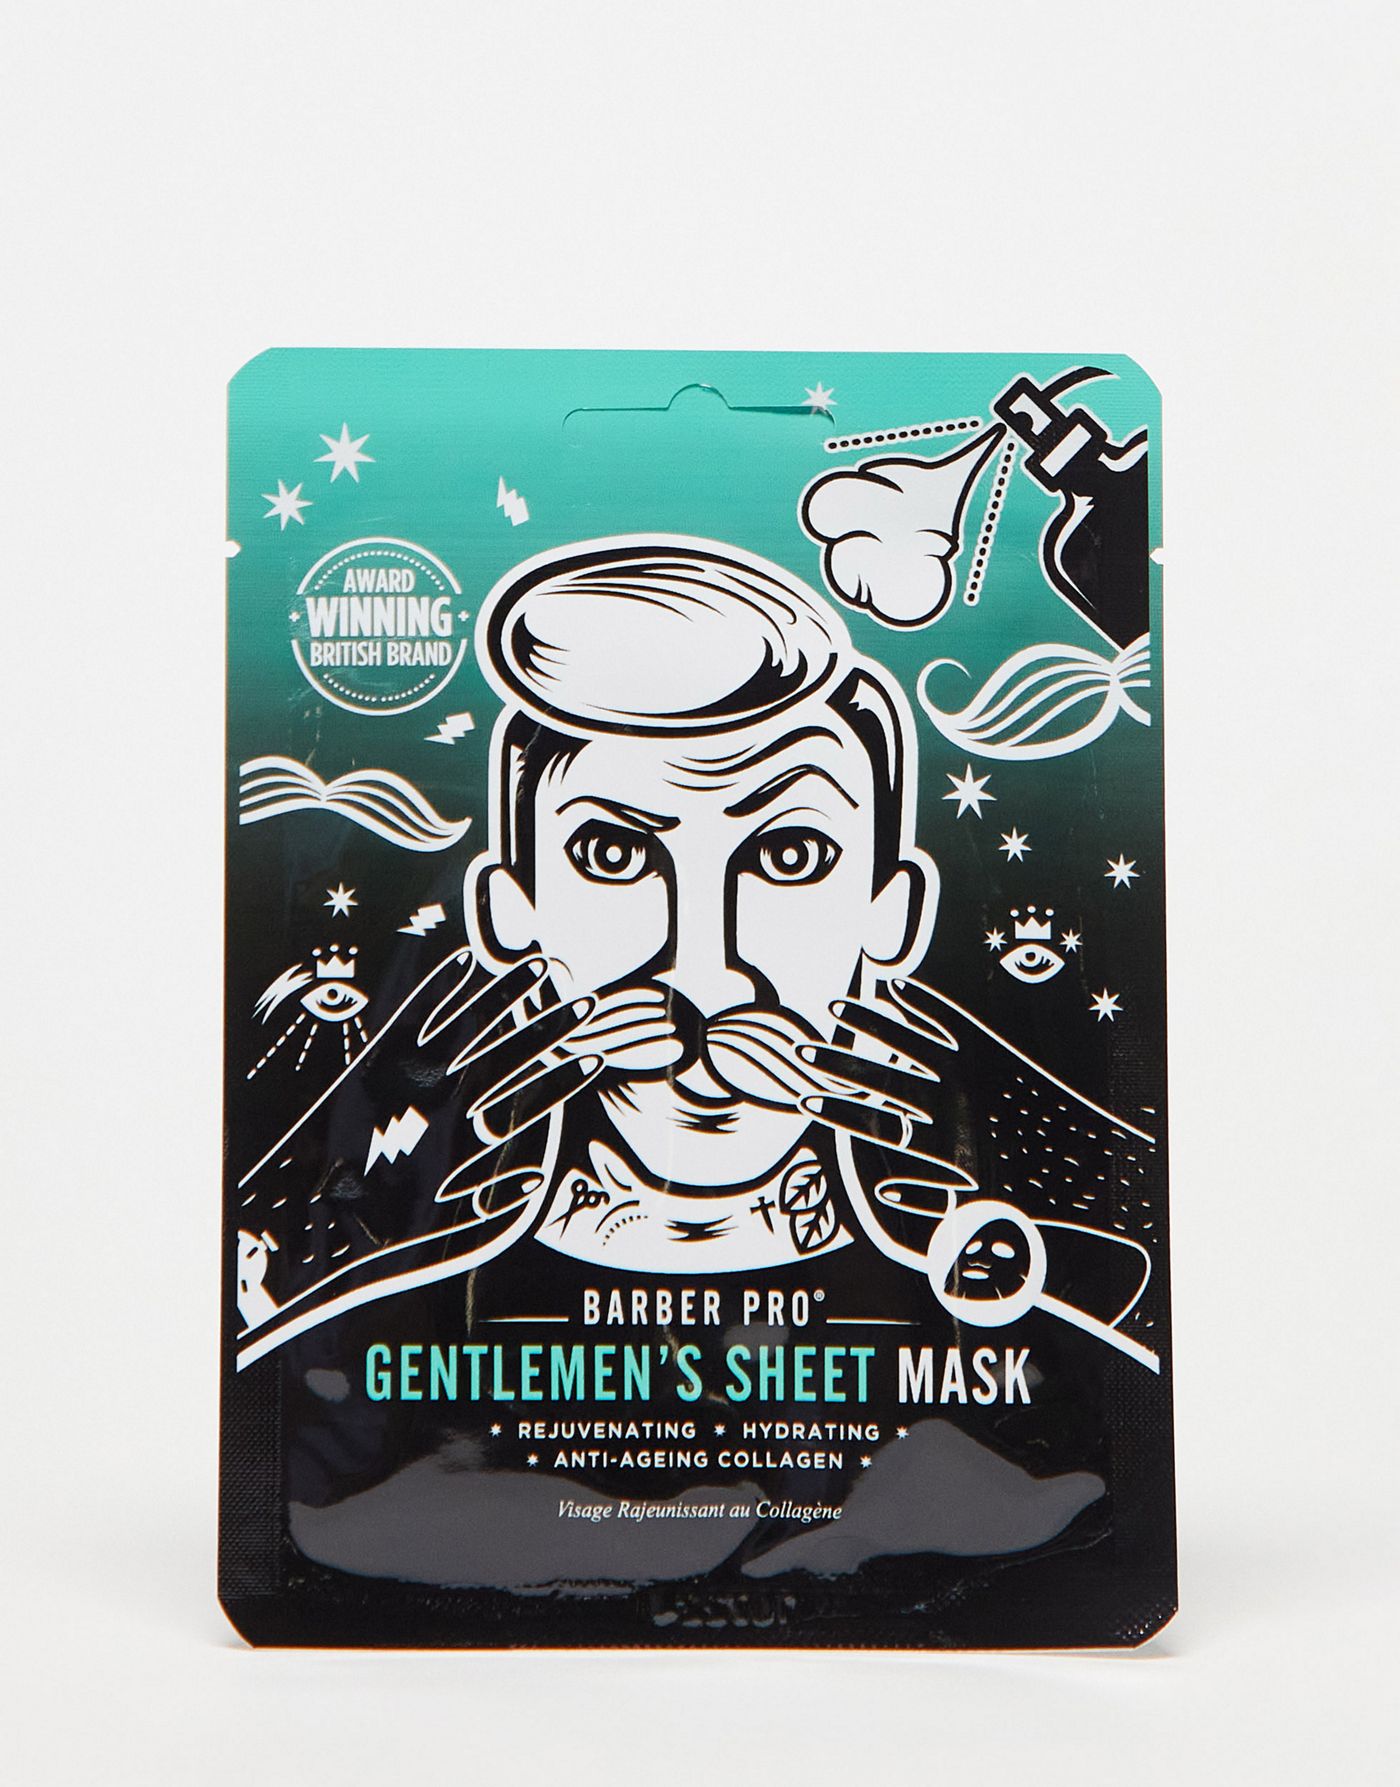 Barber Pro Christmask Card with Gentleman's Face Mask